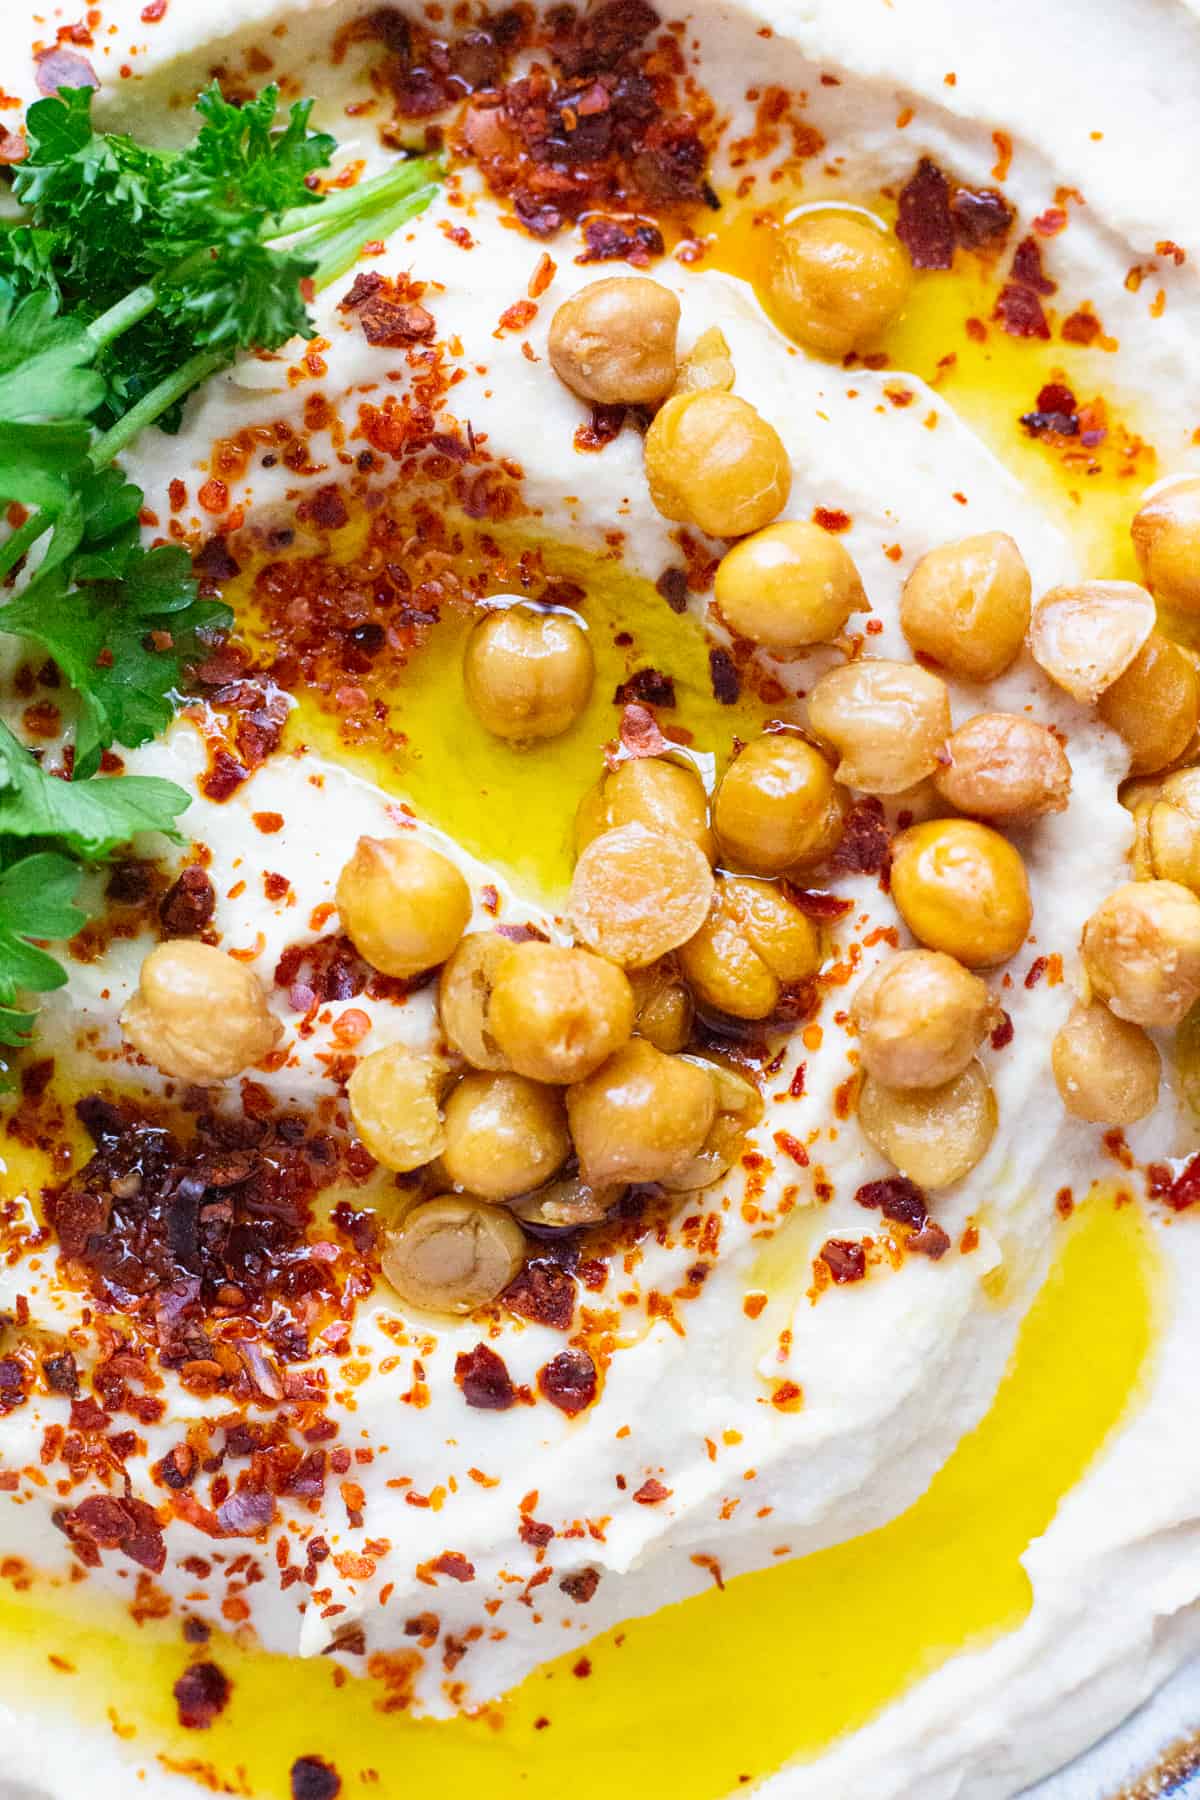 The ideal hummus is smooth, creamy and perfectly spreadable.